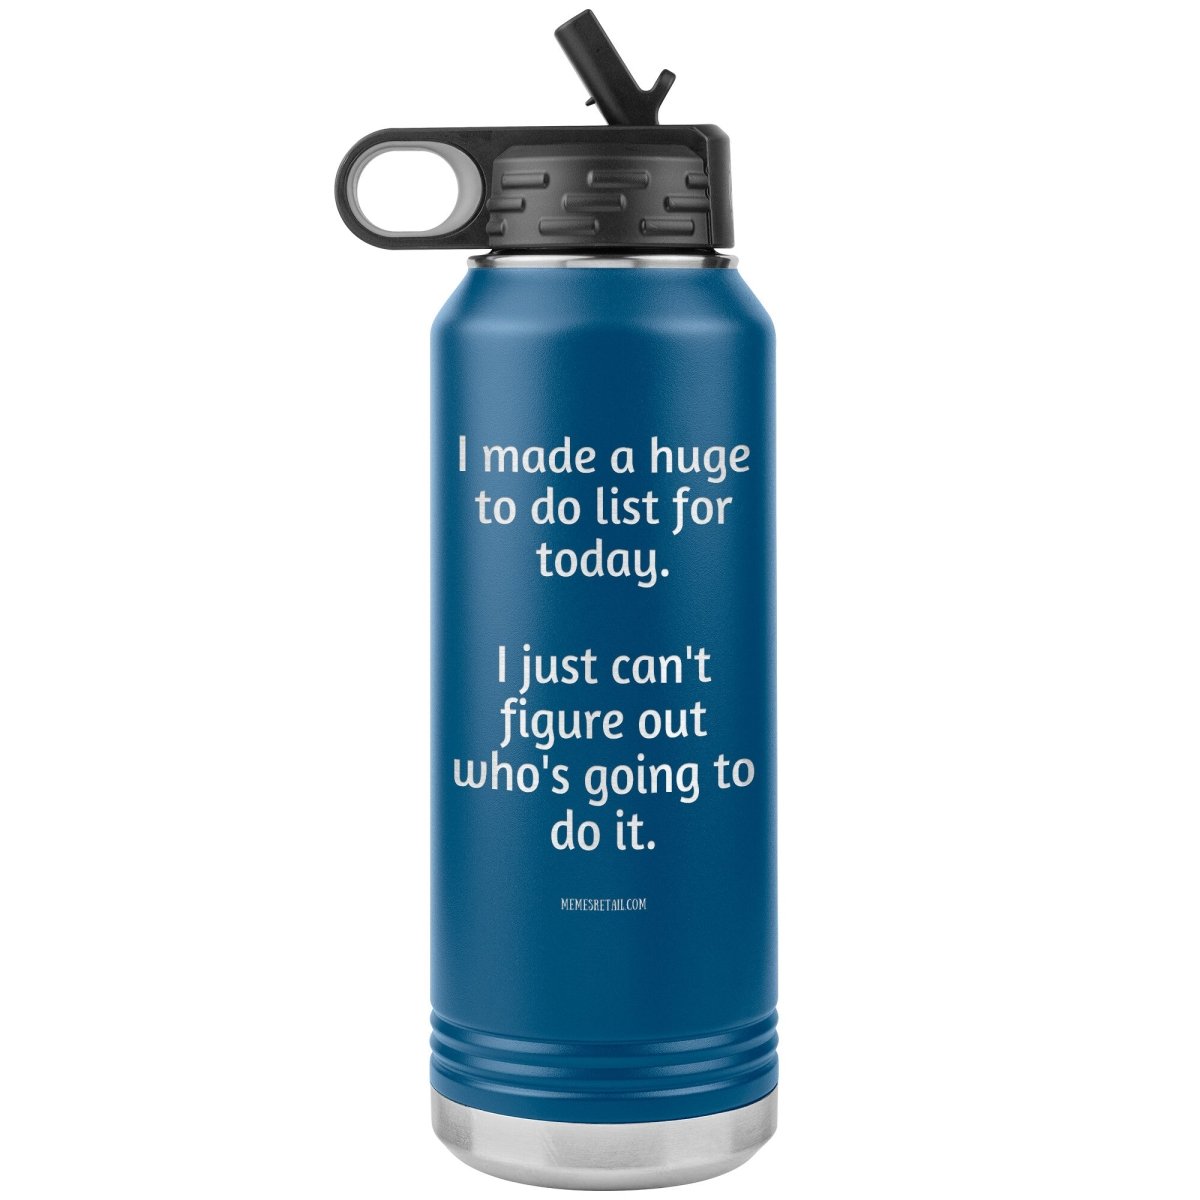 I made a huge to do list for today. I just can't figure out who's going to do it. 32 oz Water Tumbler, Blue - MemesRetail.com